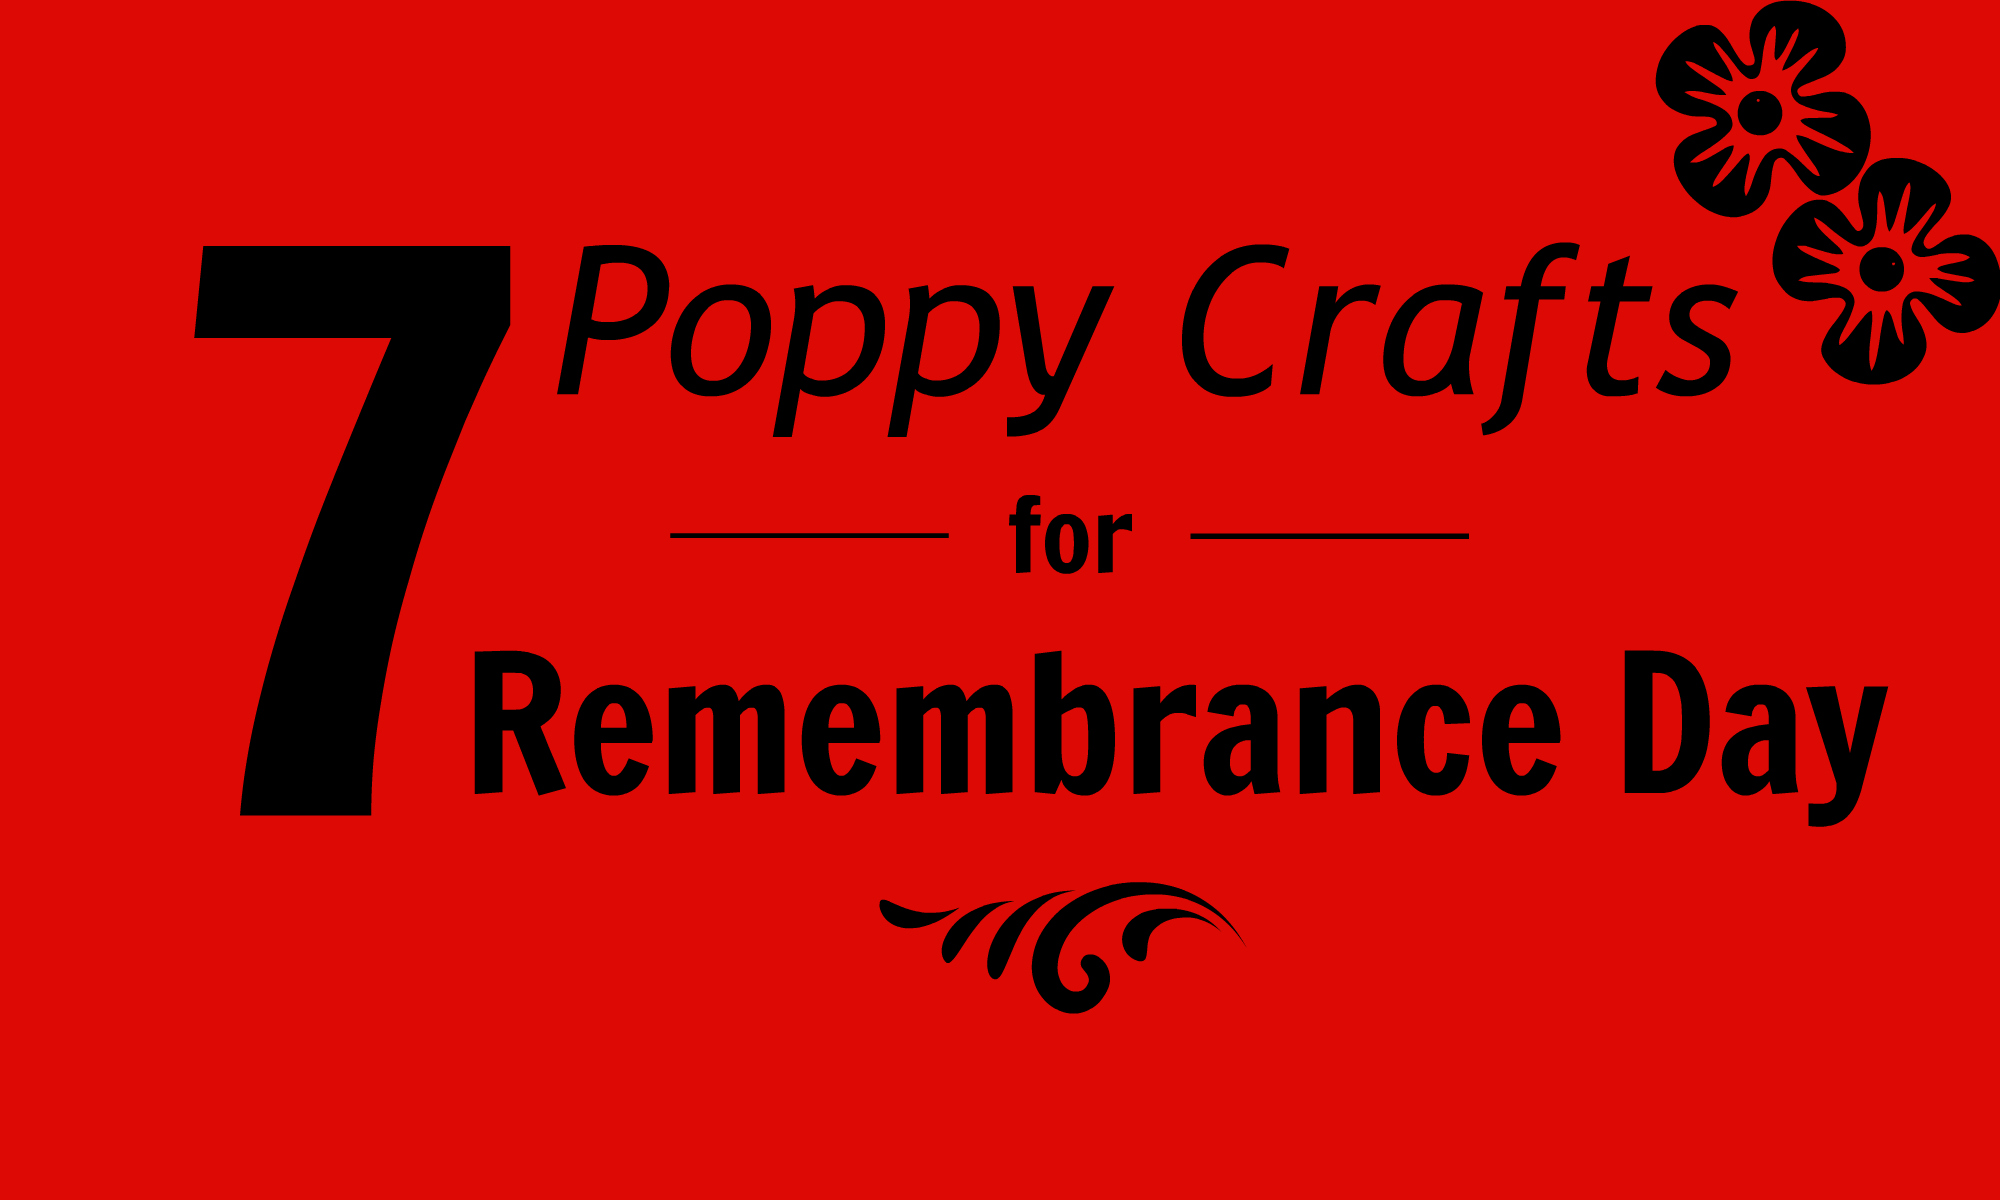 7 Poppy Crafts for Remembrance Day